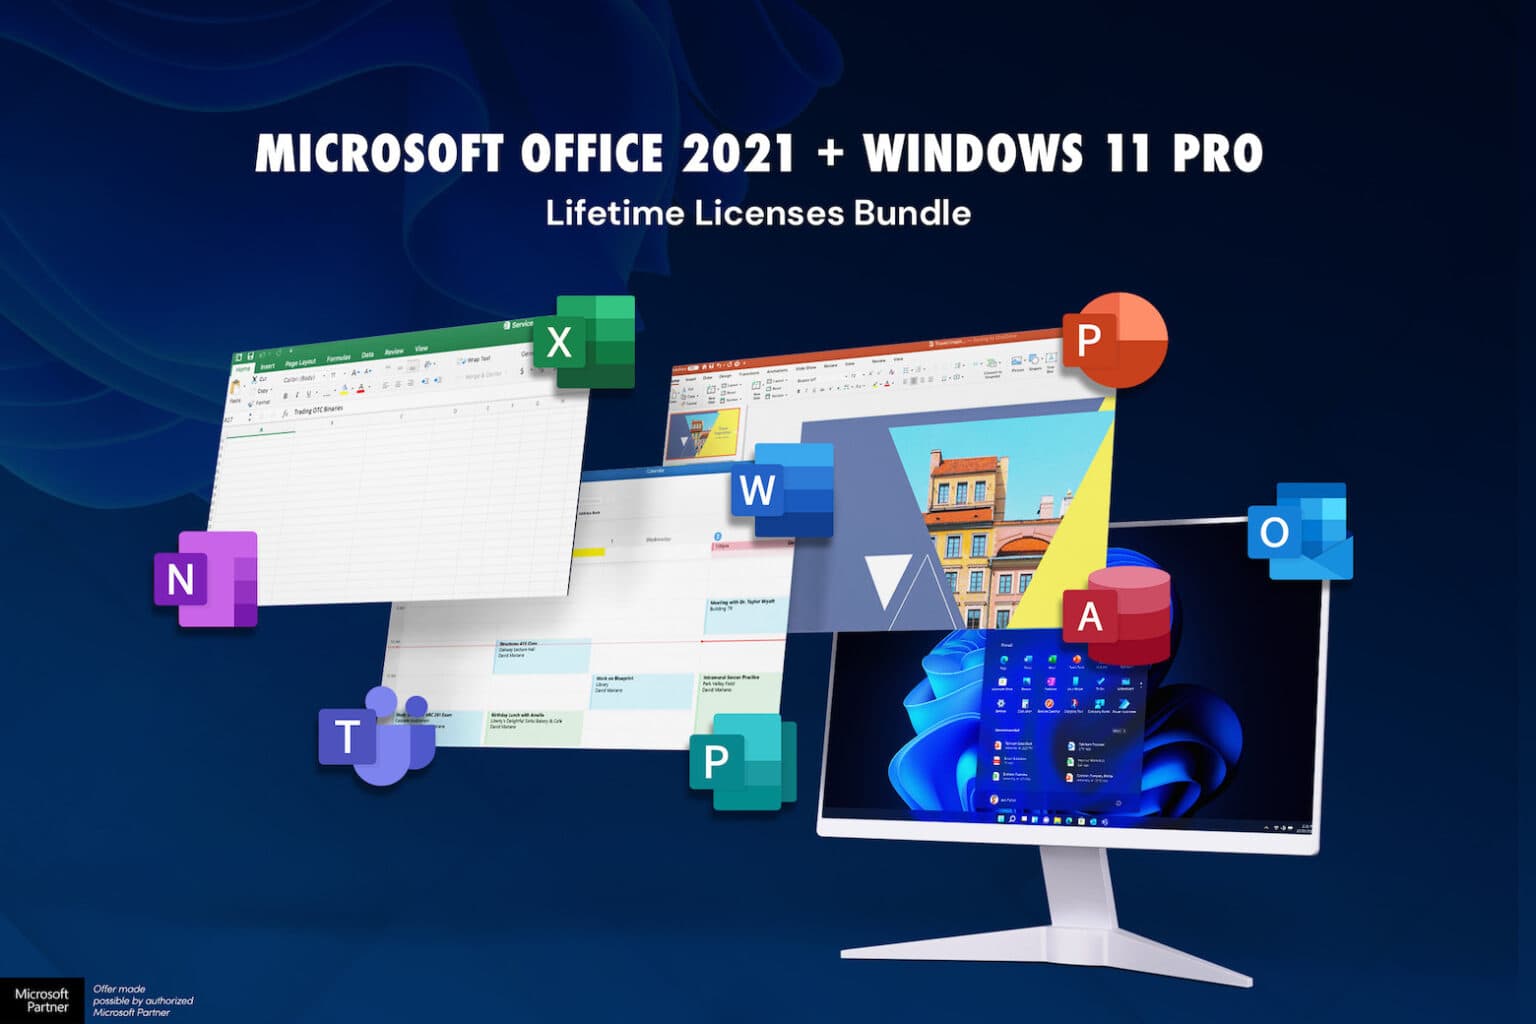 Get MS Office and Windows 11 Pro for $50 through 10/15.